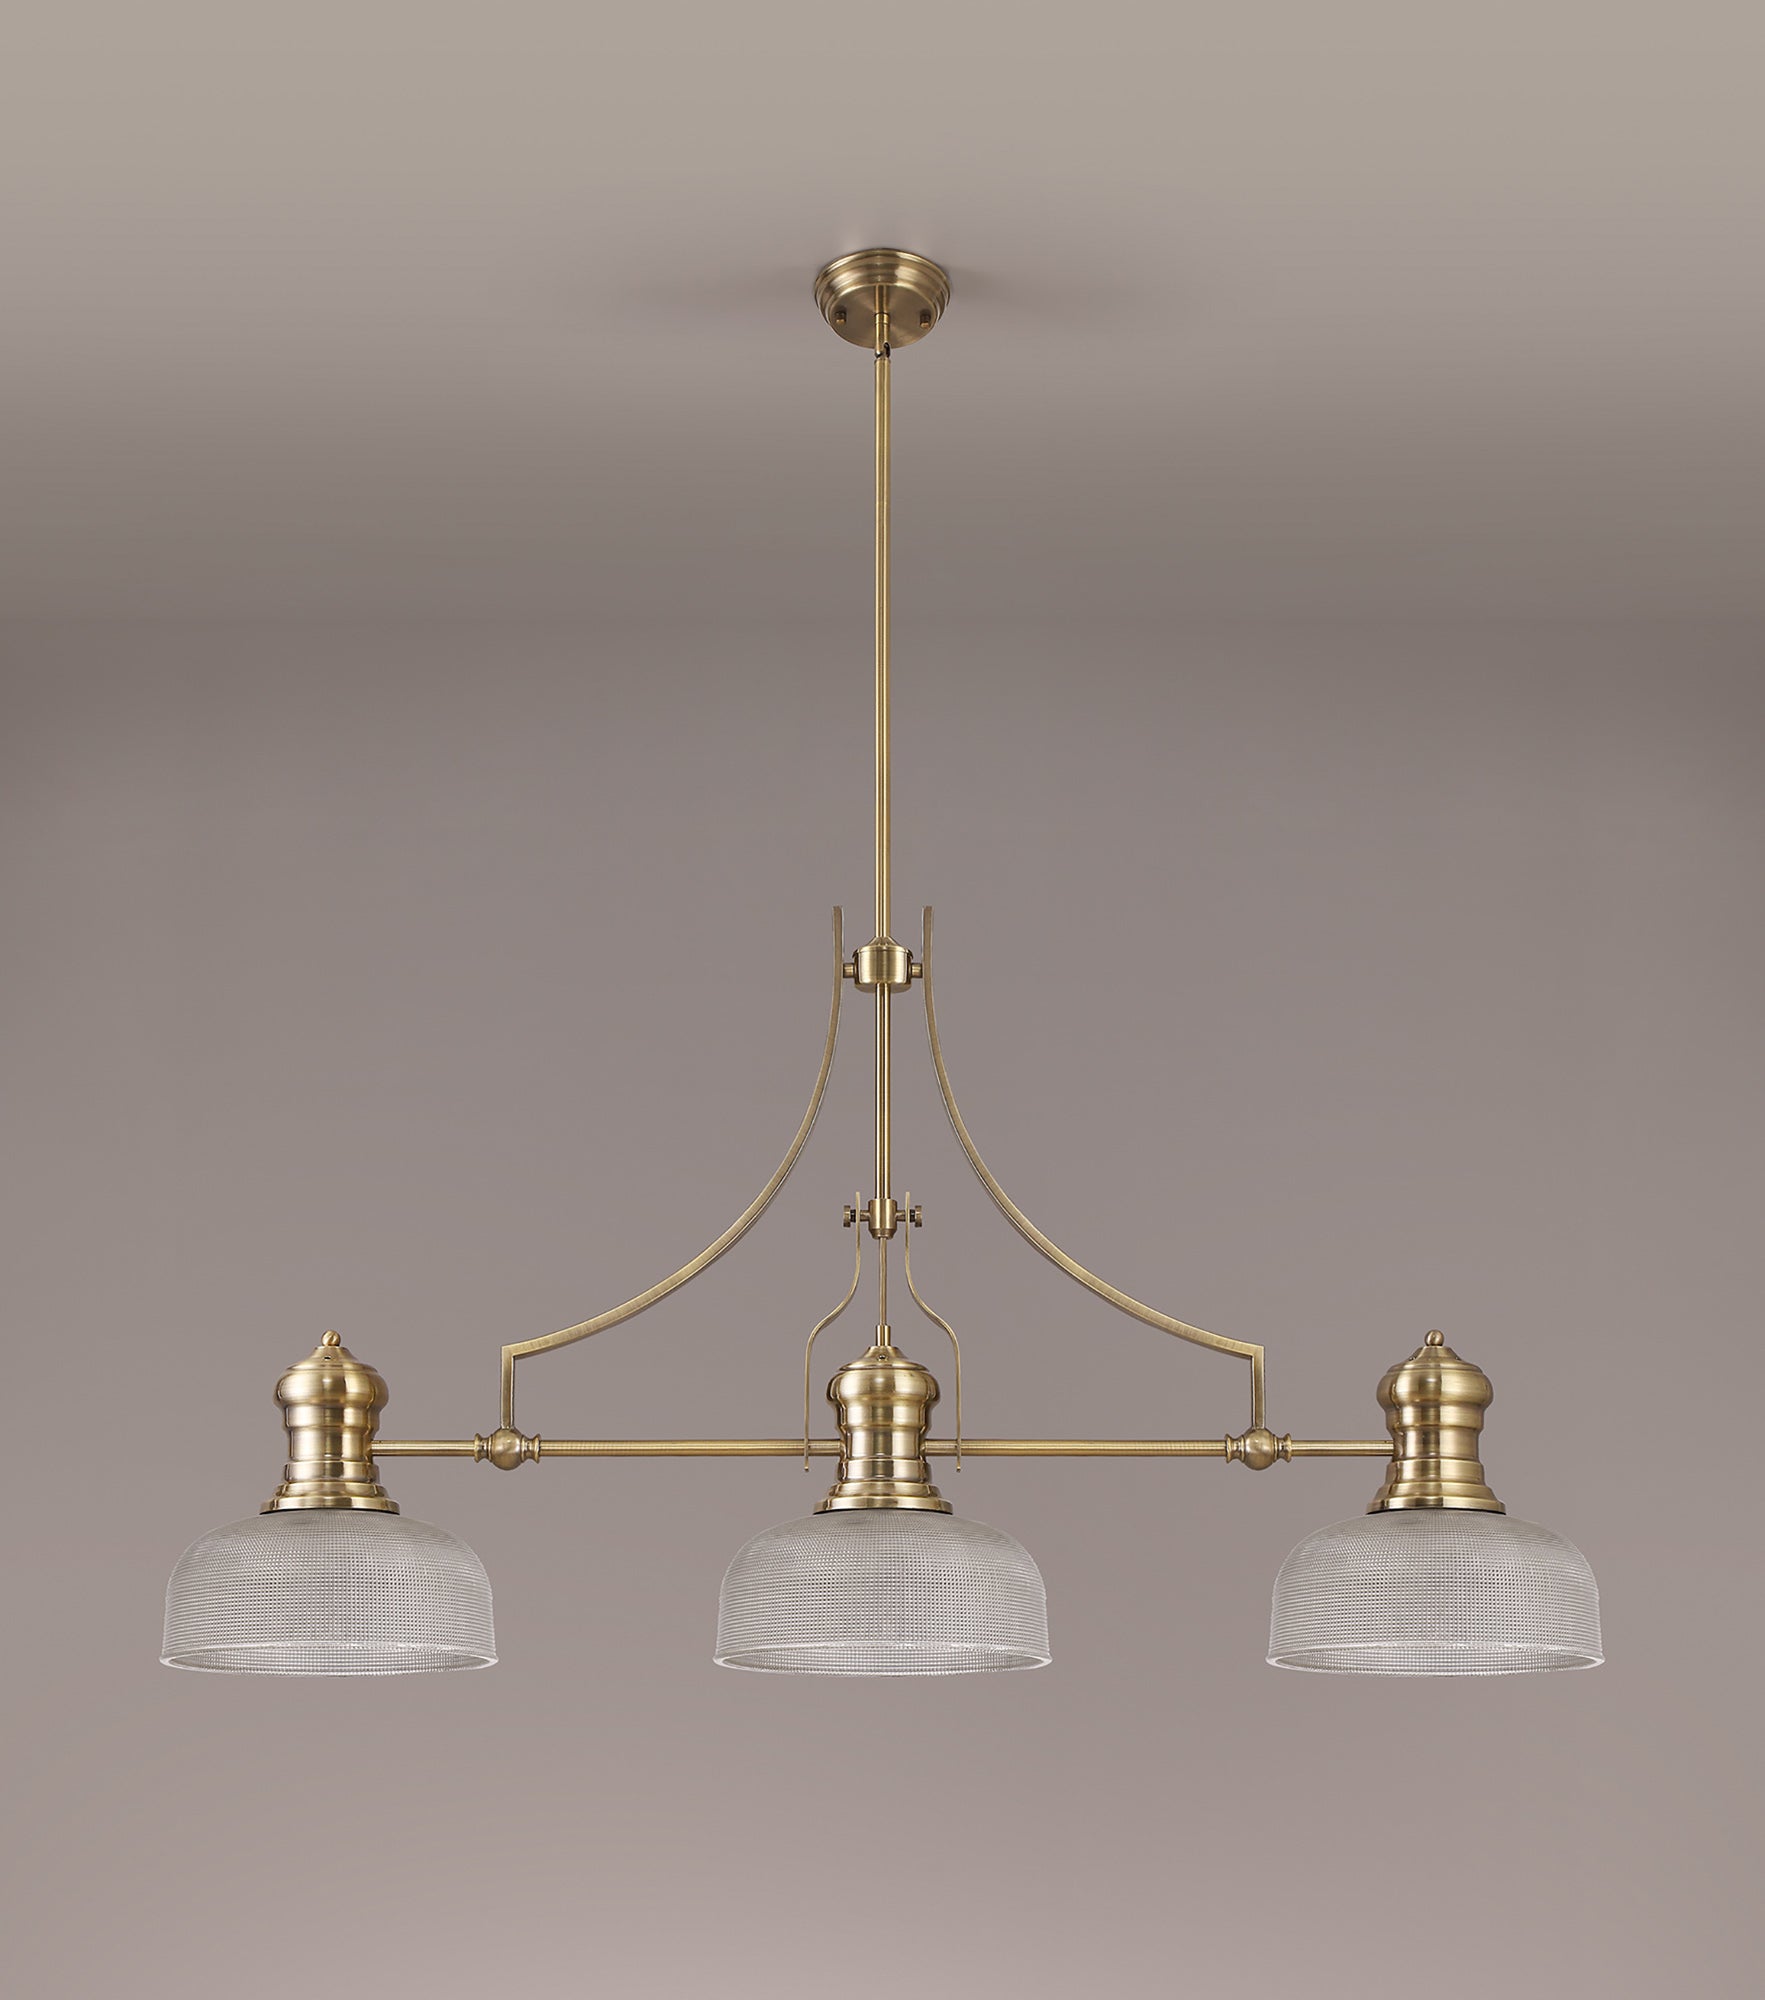 Docker 3 Light Linear Pendant E27 With 26.5cm Prismatic Glass Shade, Antique Brass, Clear